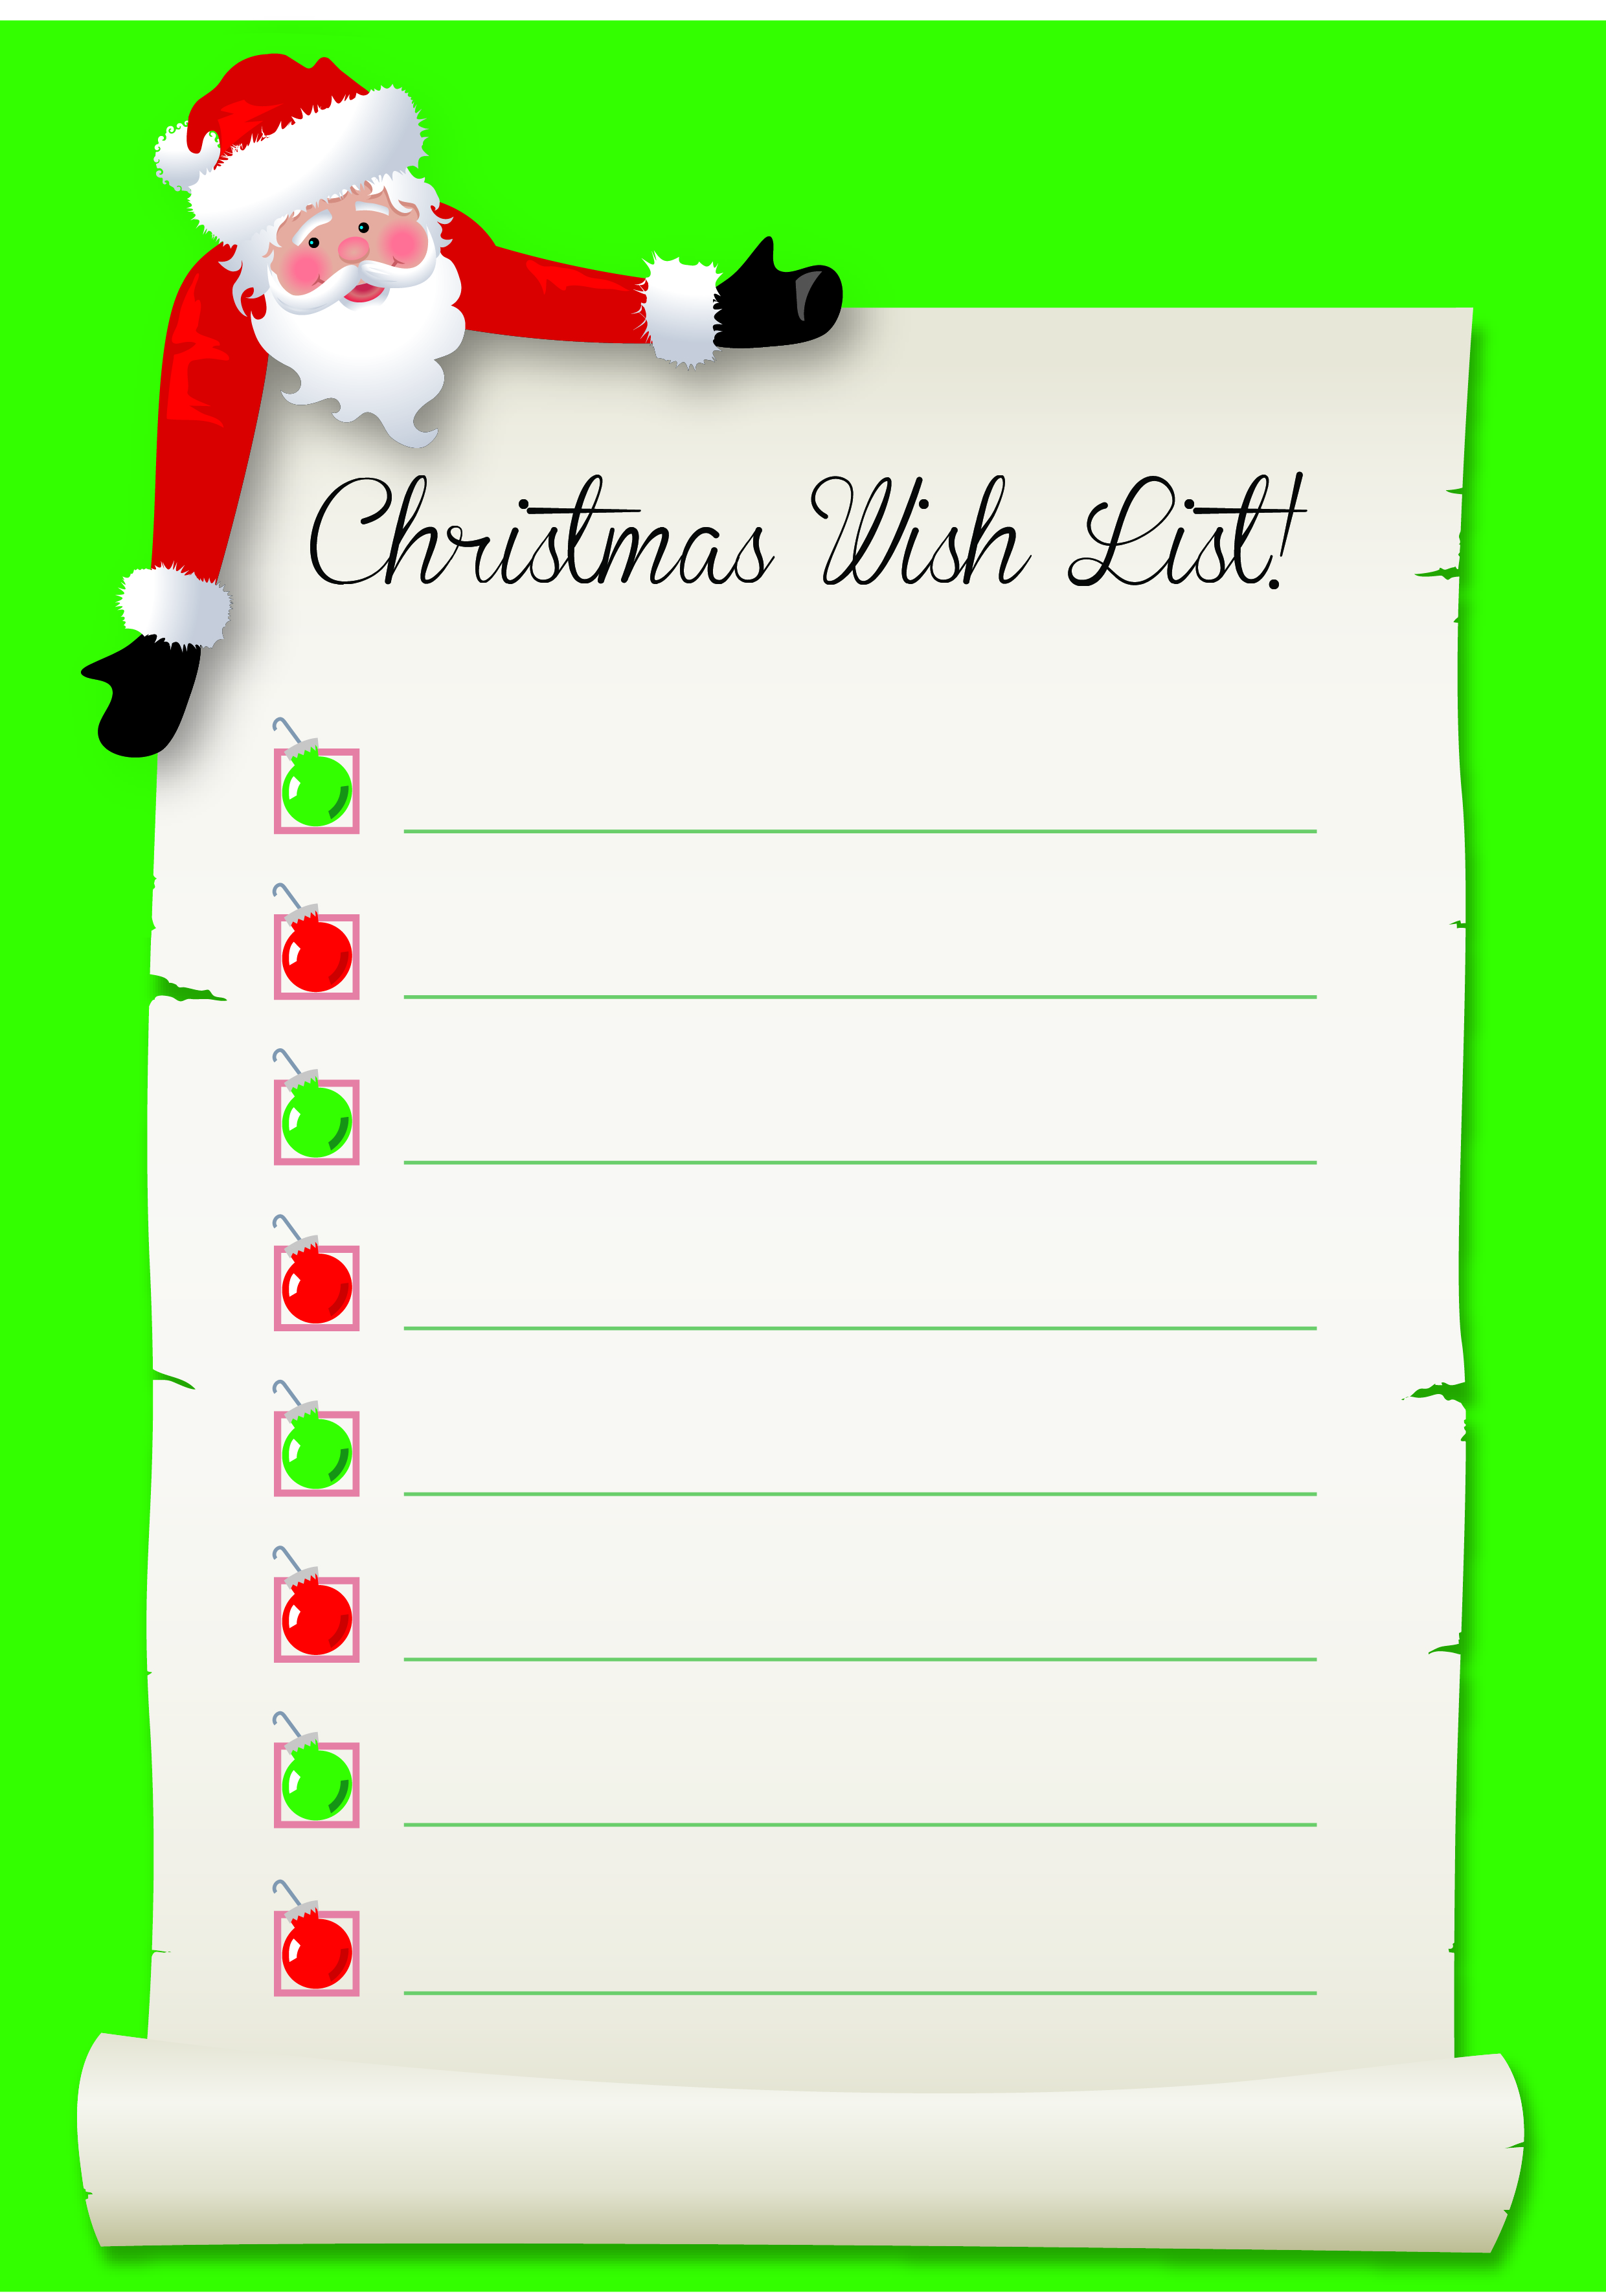 my wish for christmas essay